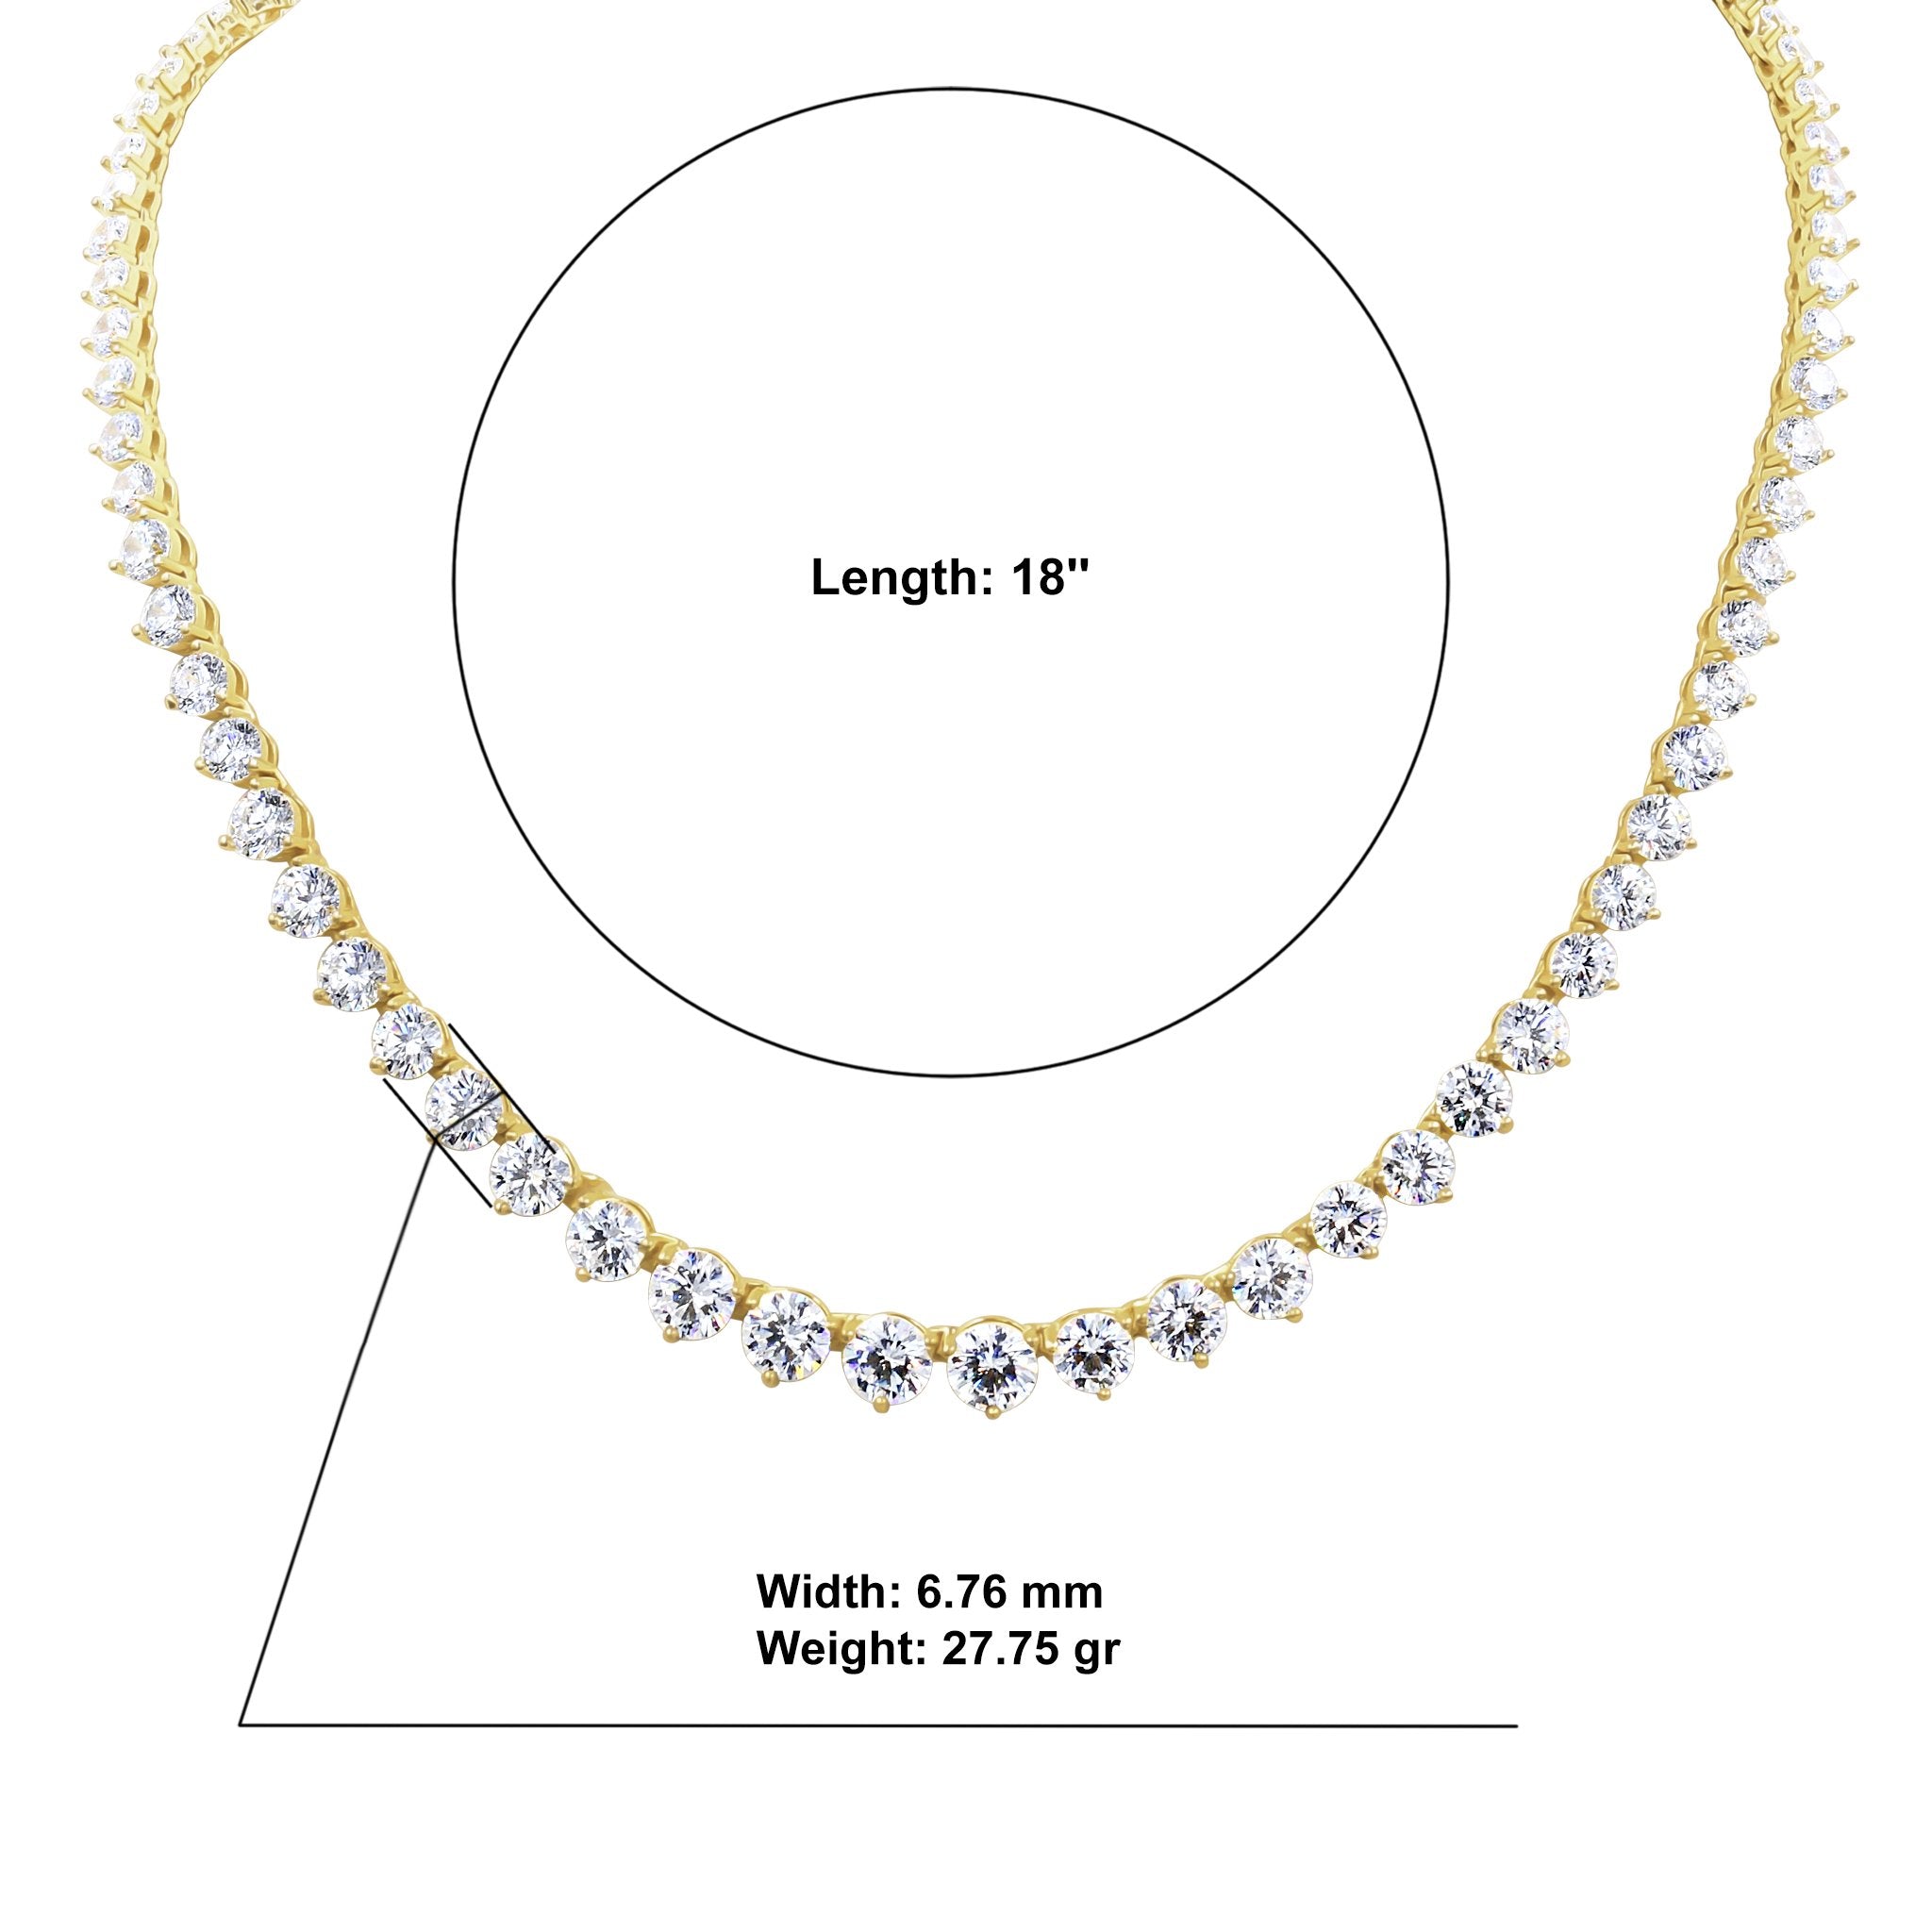 Luculentus 925 Silver 14K Yellow Gold Plated Chain With Cz Stones